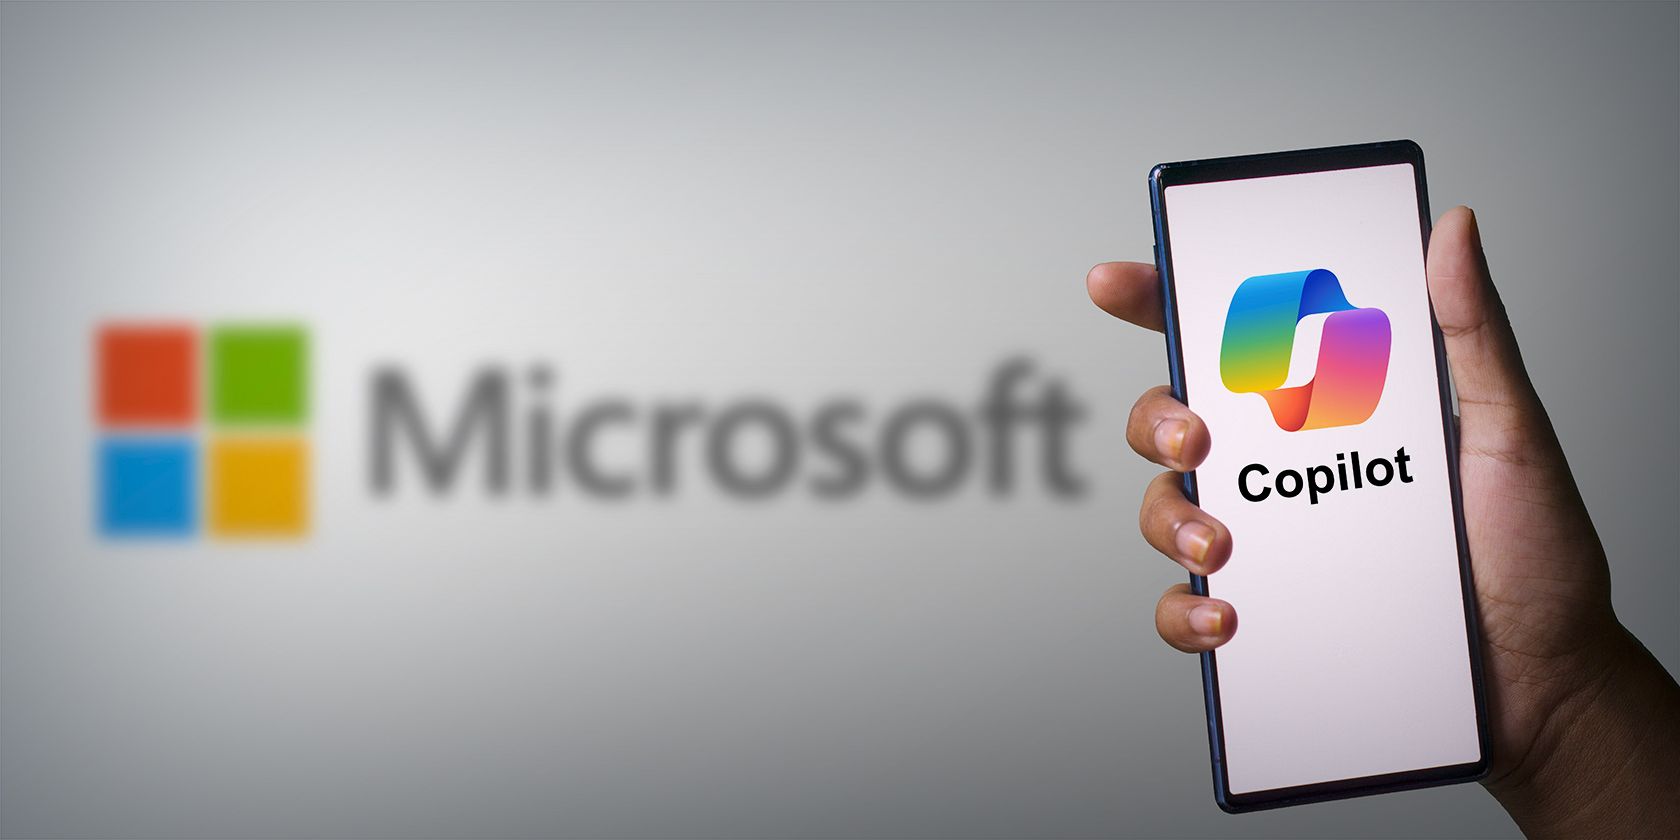 A smartphone screen displaying a Copilot logo with the Microsoft logo in the background